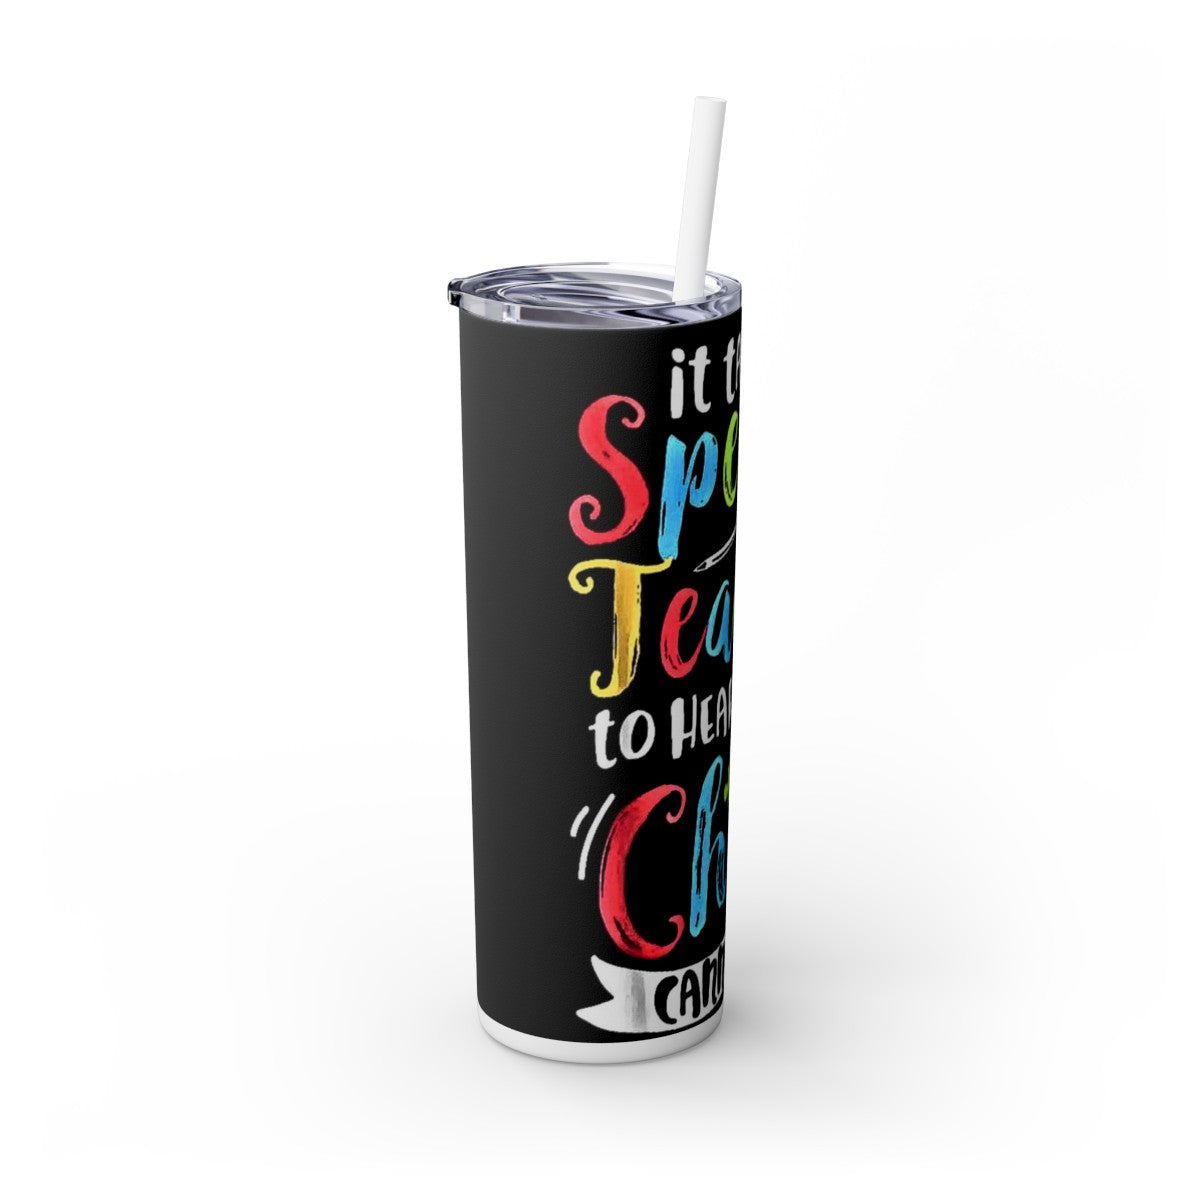 Get trendy with It Takes A Special Teacher Skinny Tumbler with Straw, 20oz -  available at Good Gift Company. Grab yours for $44.20 today!